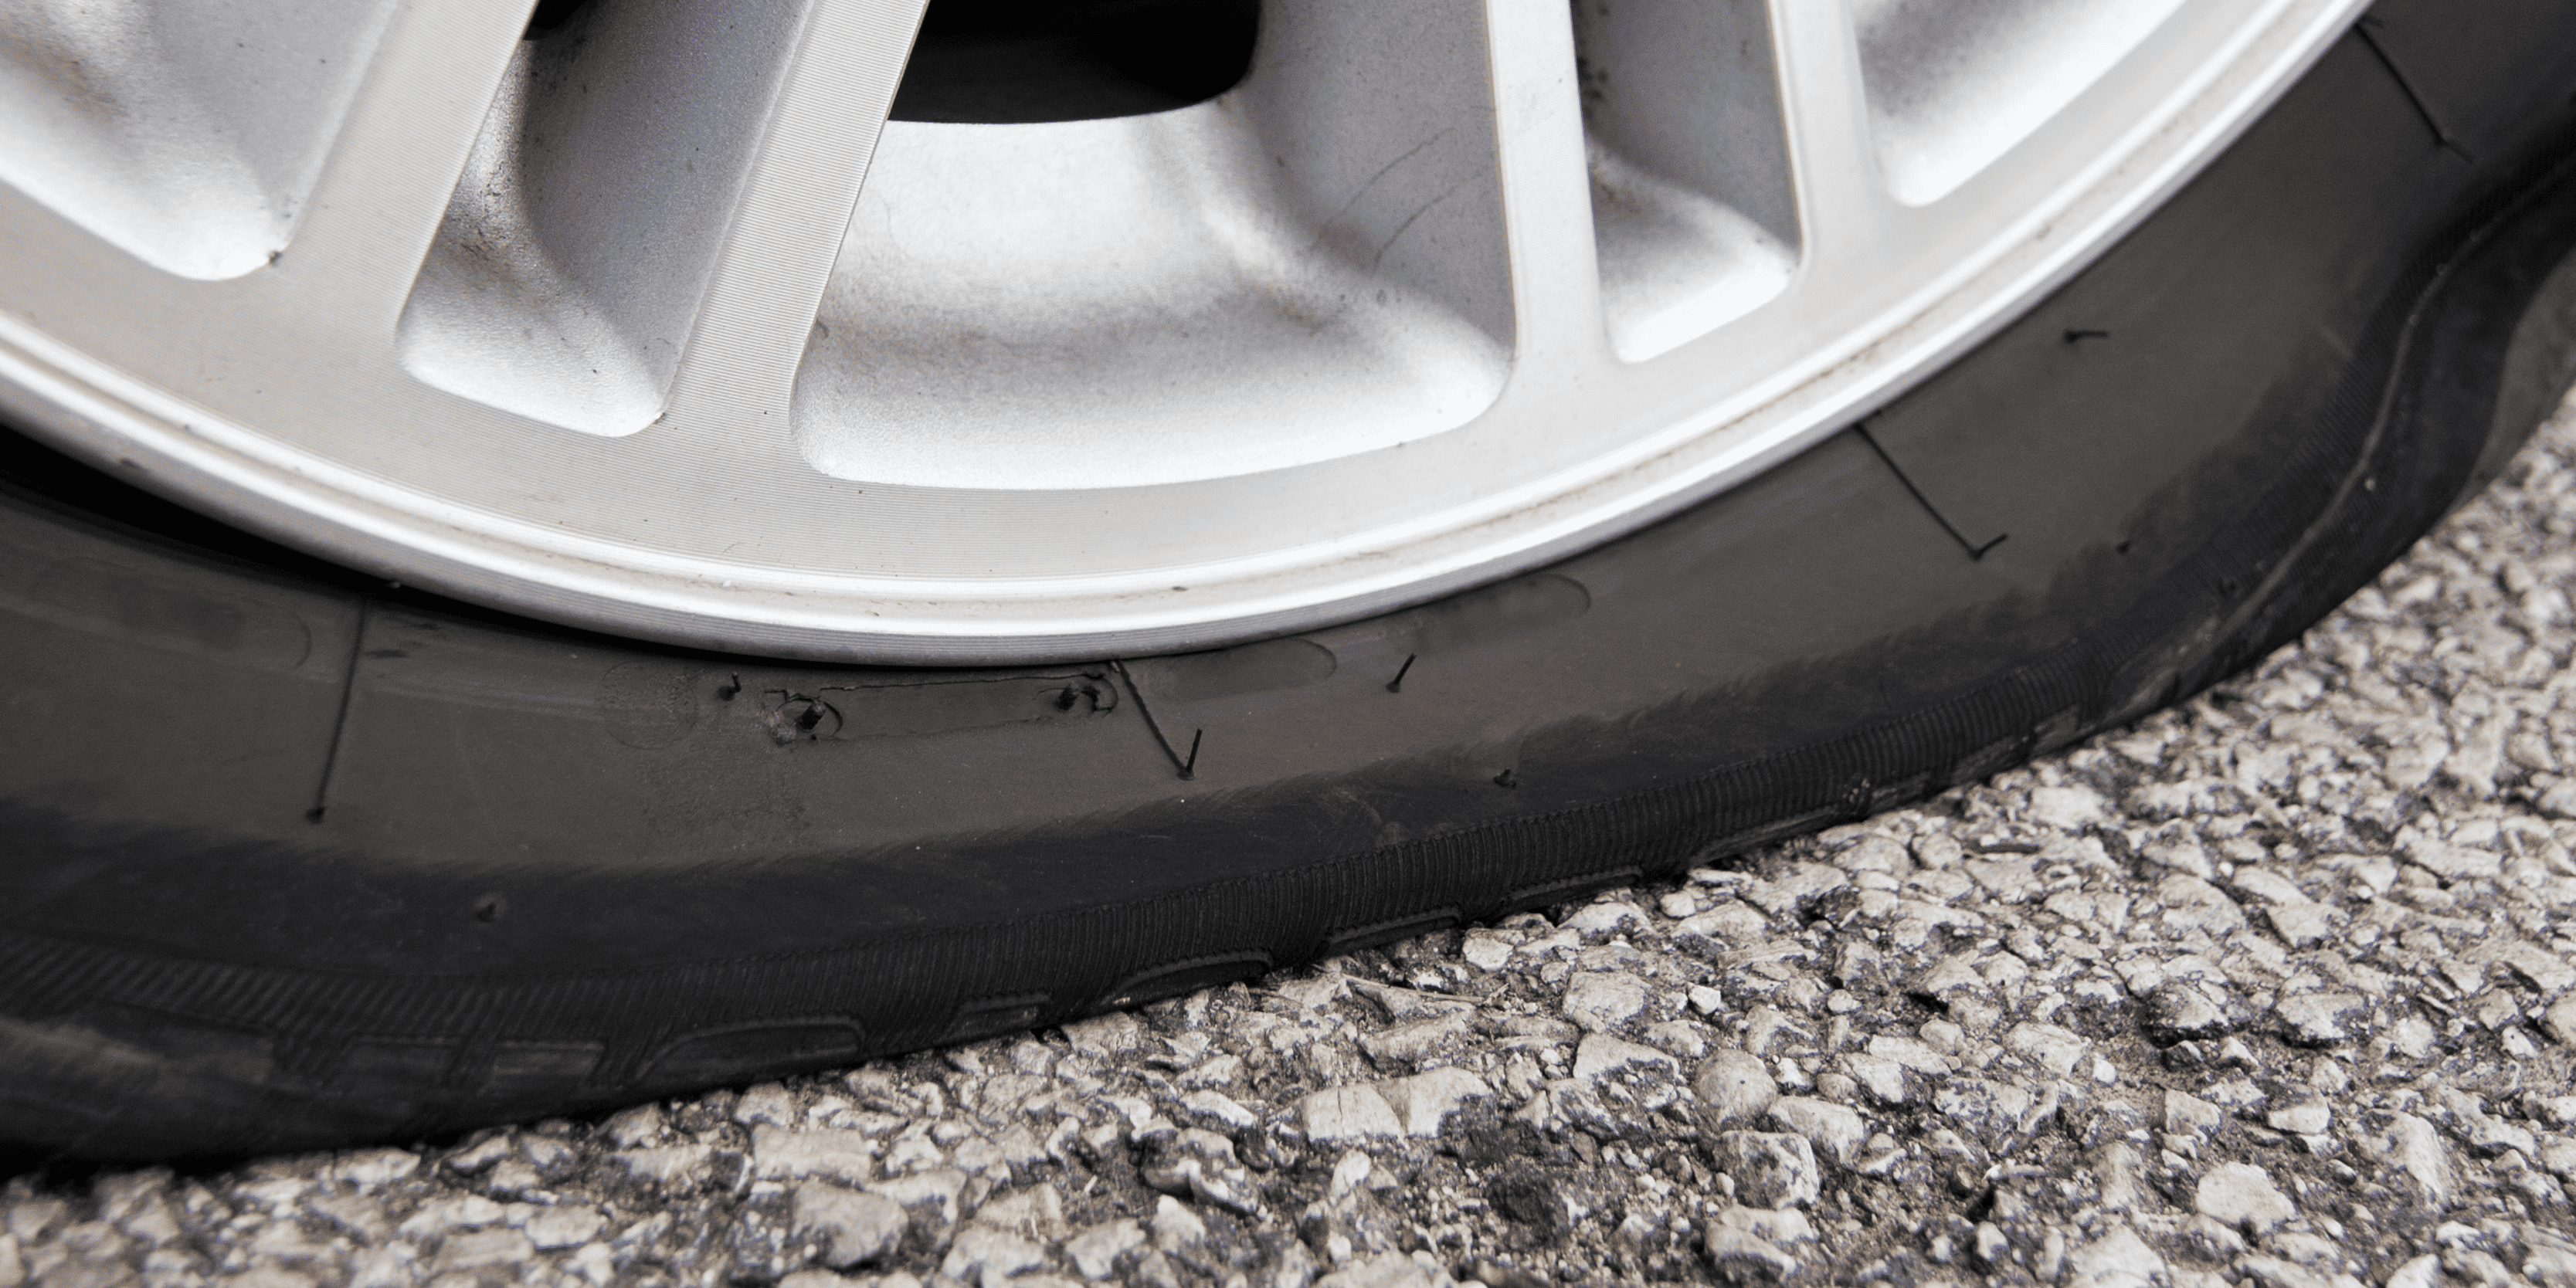 Flat Tire Got You Down? Here’s What To Do